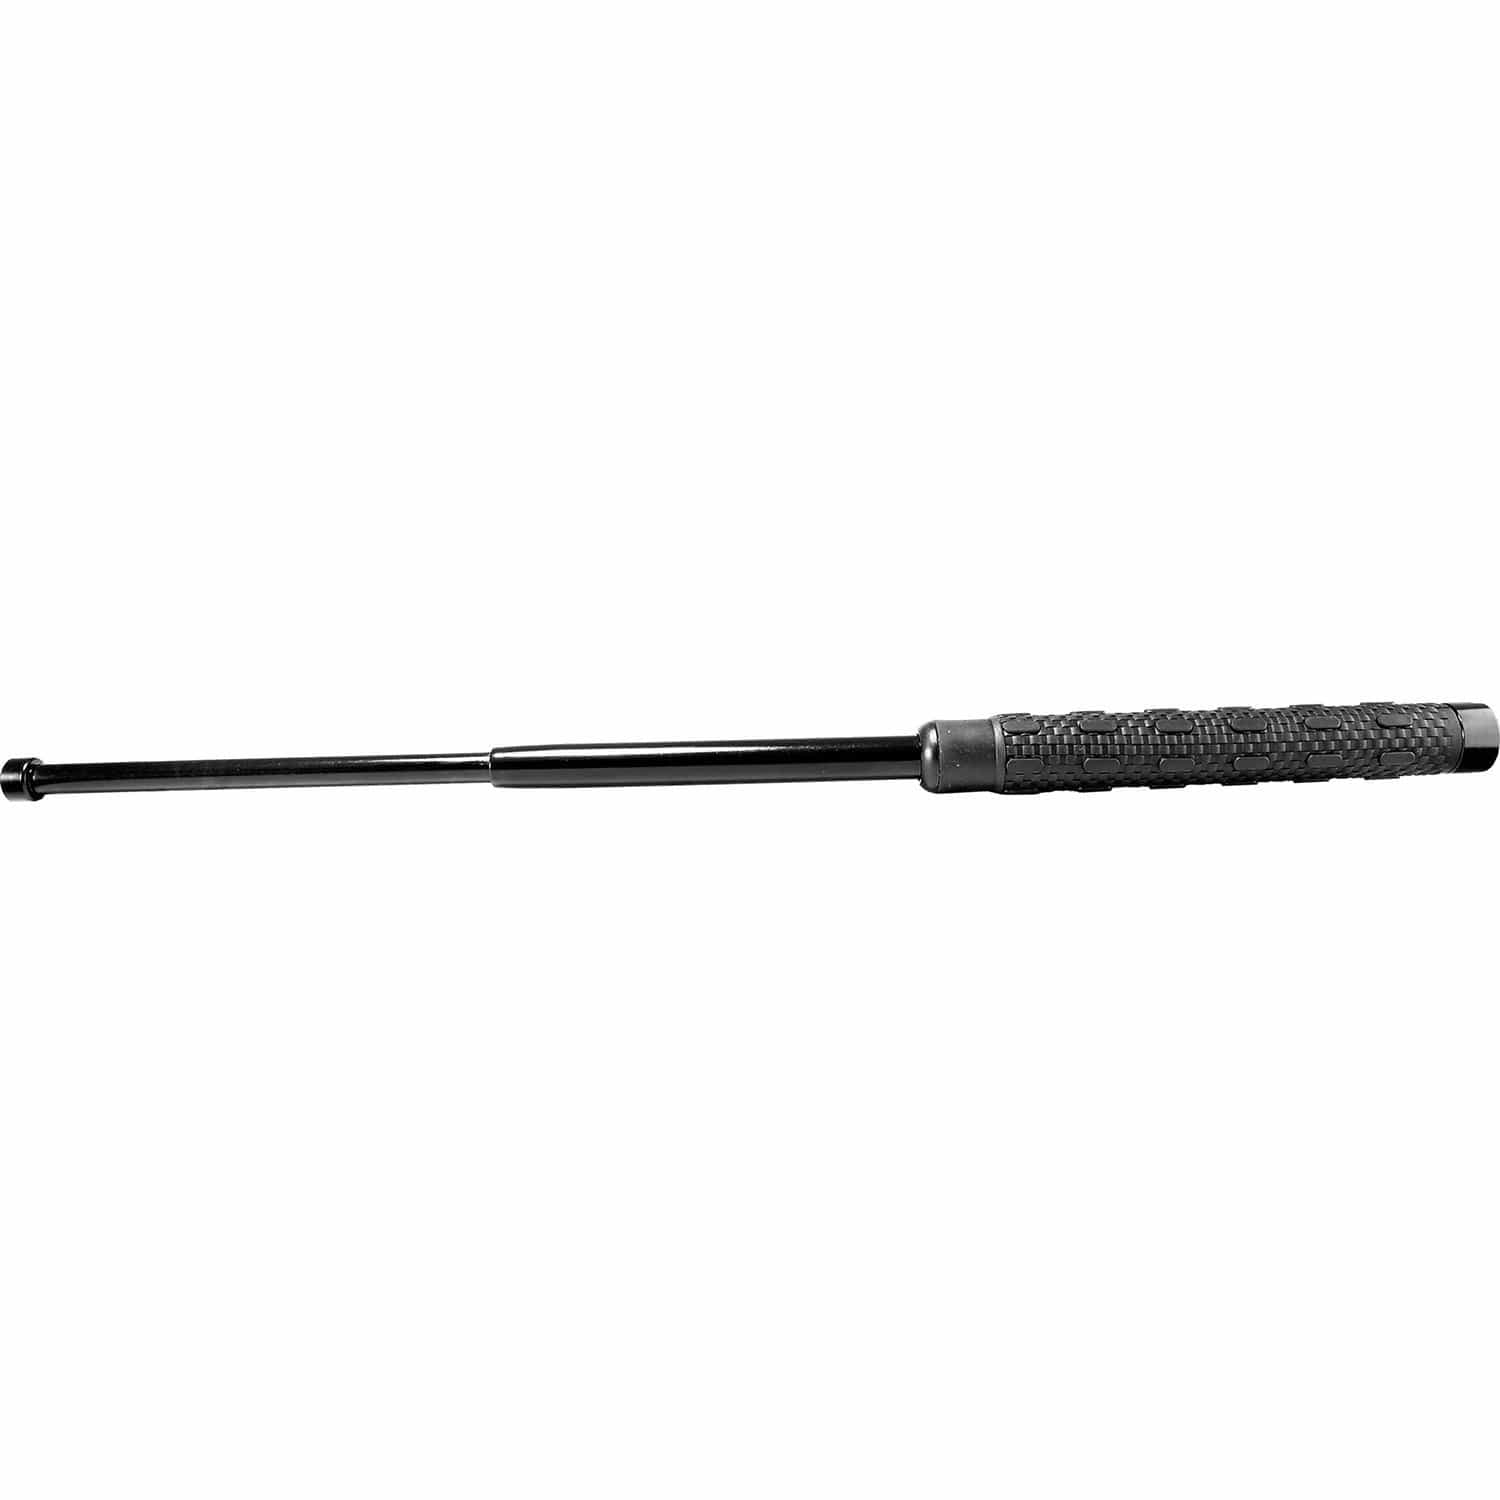 Smith & Wesson Public Safety/L.E. : Batons & Accessories Smith and Wesson 21in Heat Treated Collapsible Baton